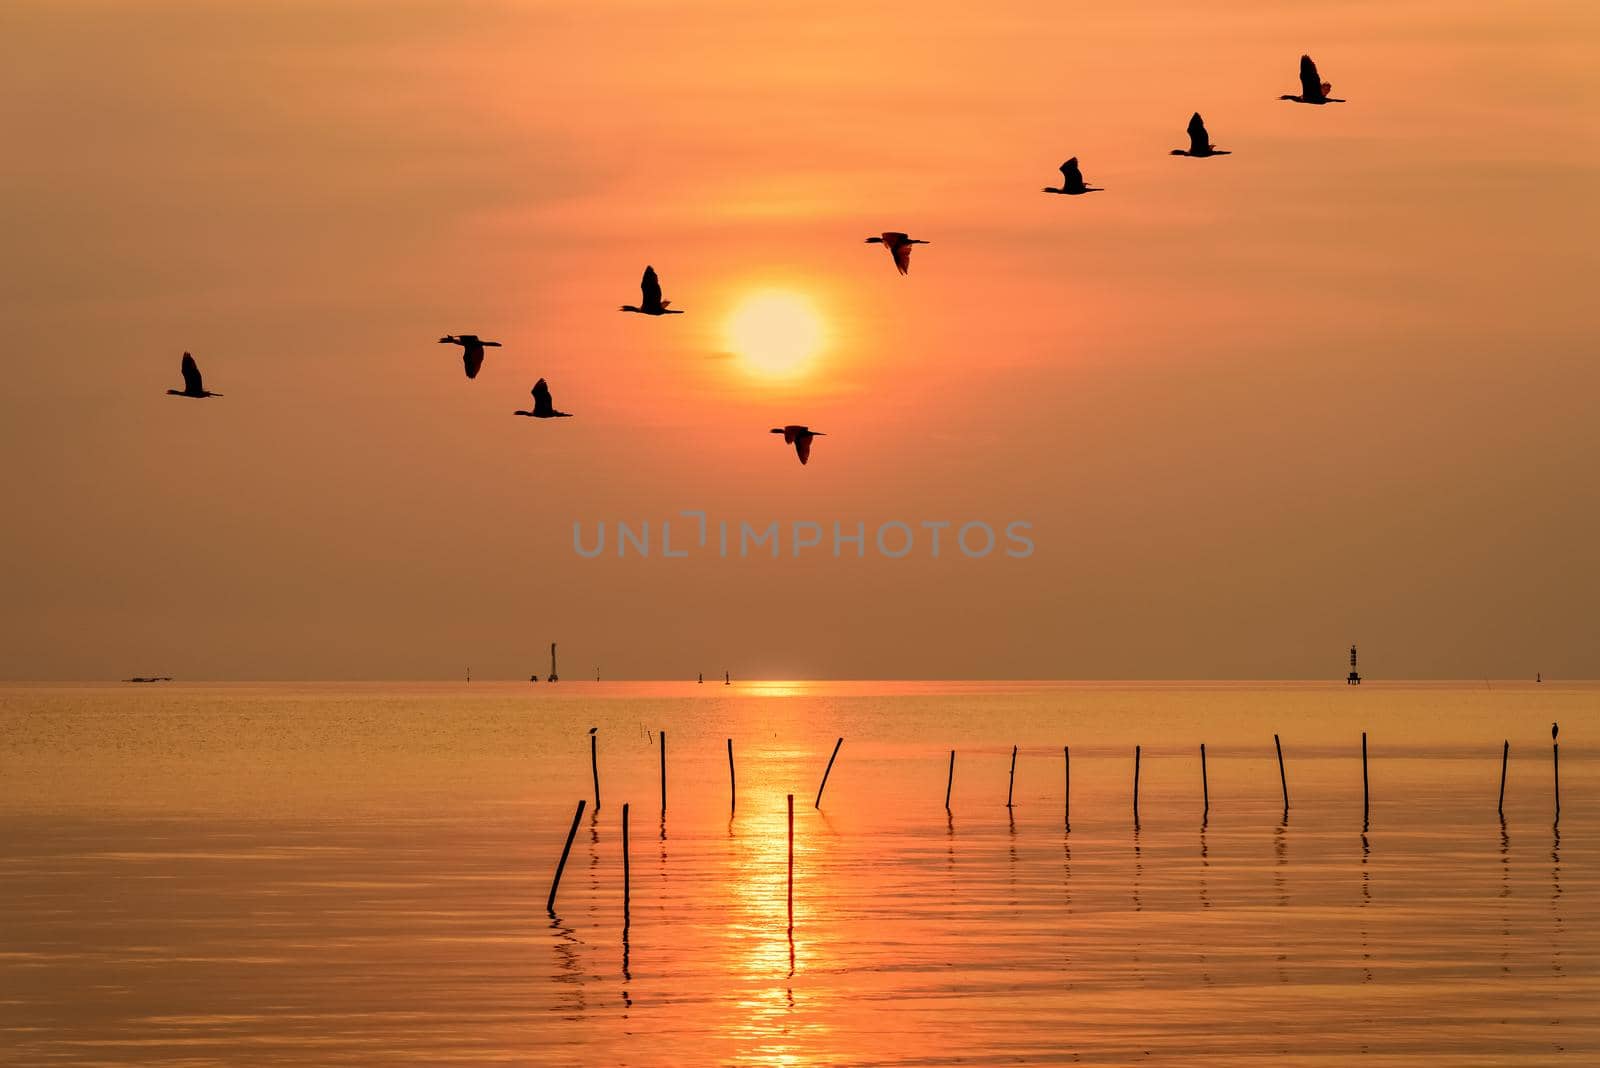 Flock of seagulls bird flying in a line through the bright yellow sun on orange light sky and sunlight reflect the water of the sea beautiful nature landscape at sunrise, sunset background, Thailand